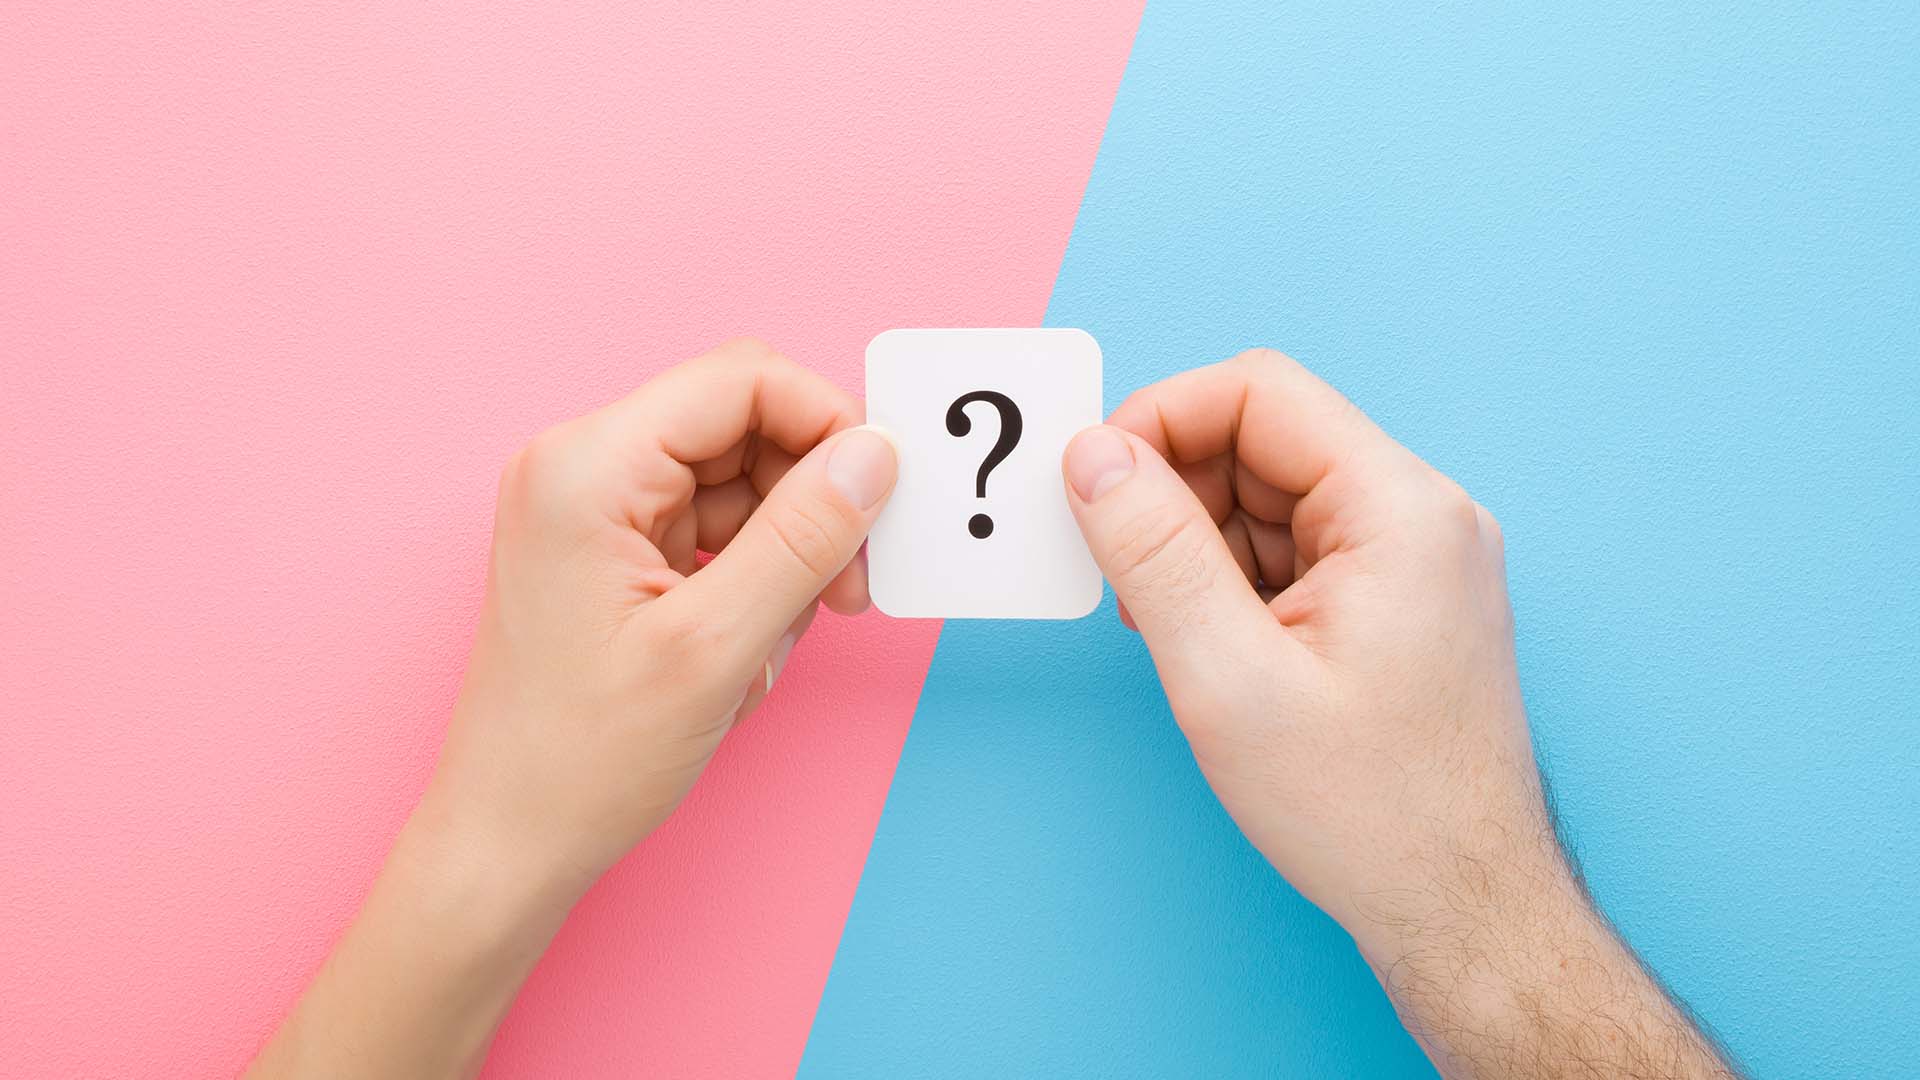 Two hands holding a card with a black question mark on it, background split between blue and pink.